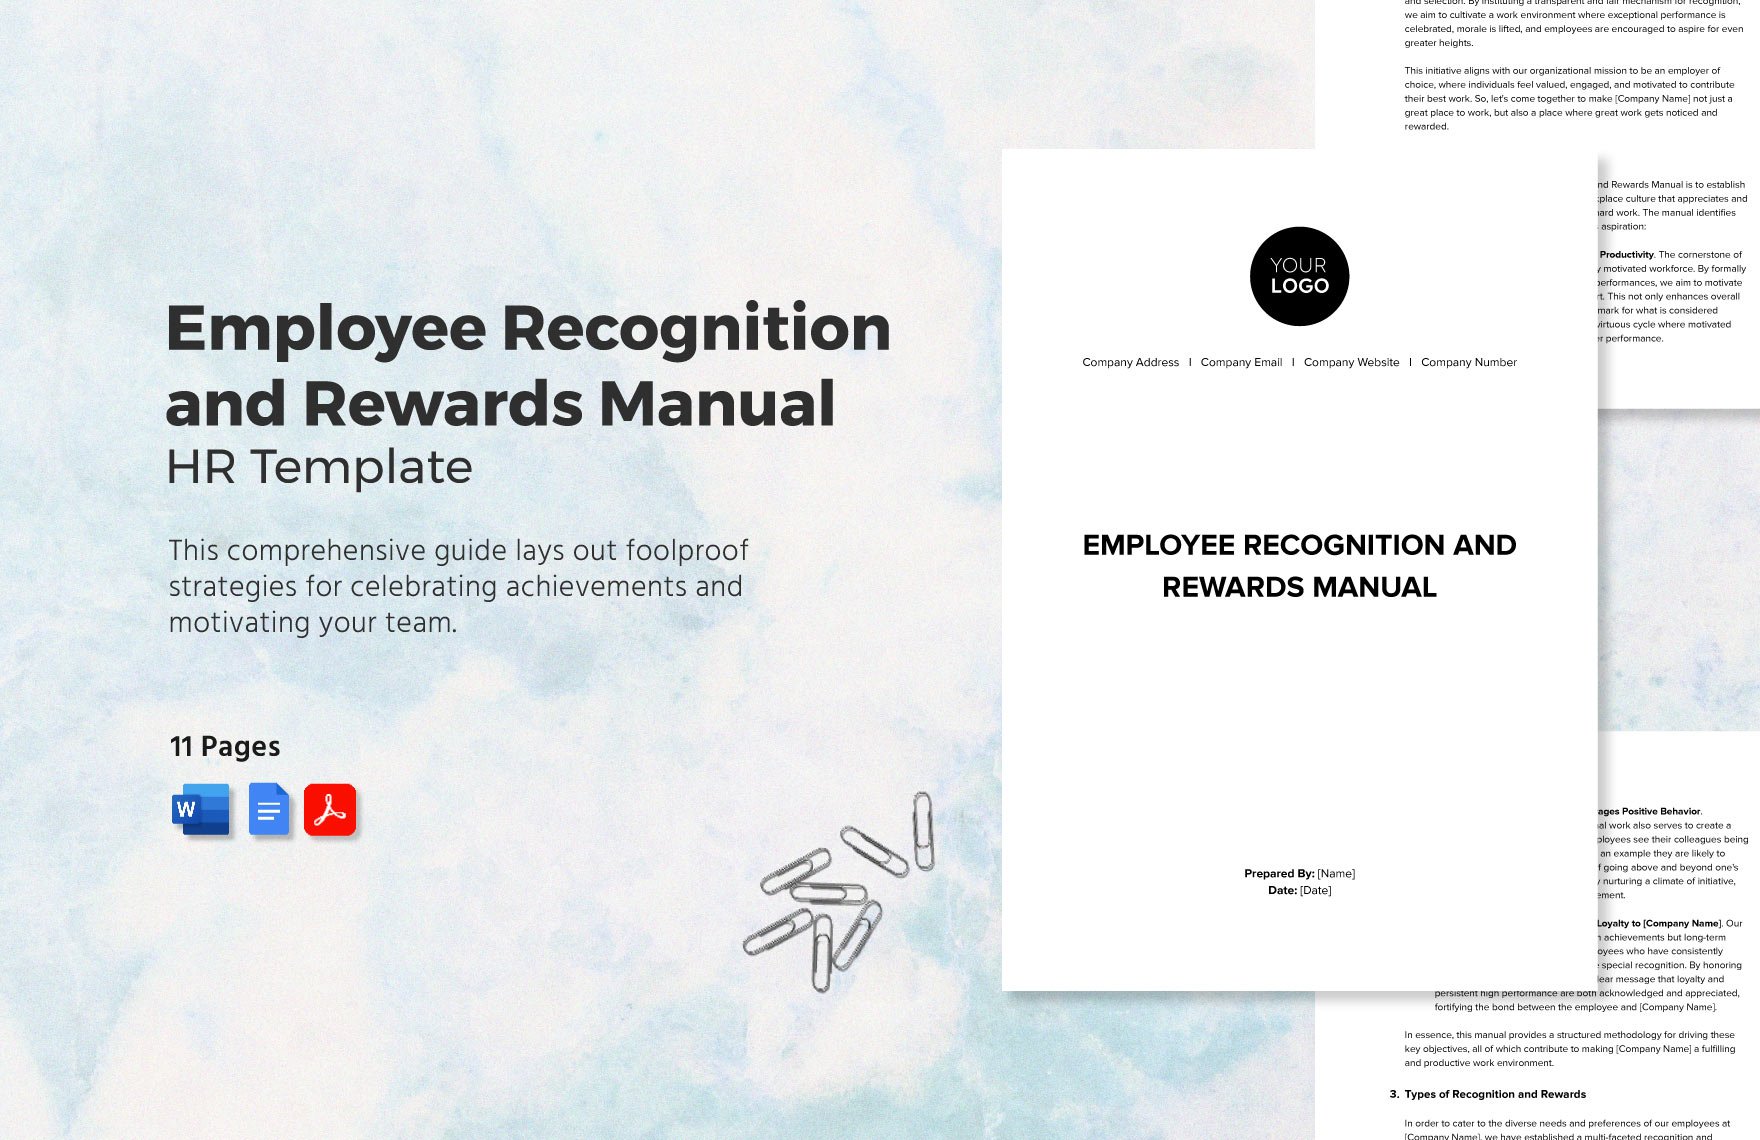 Employee Recognition and Rewards Manual HR Template